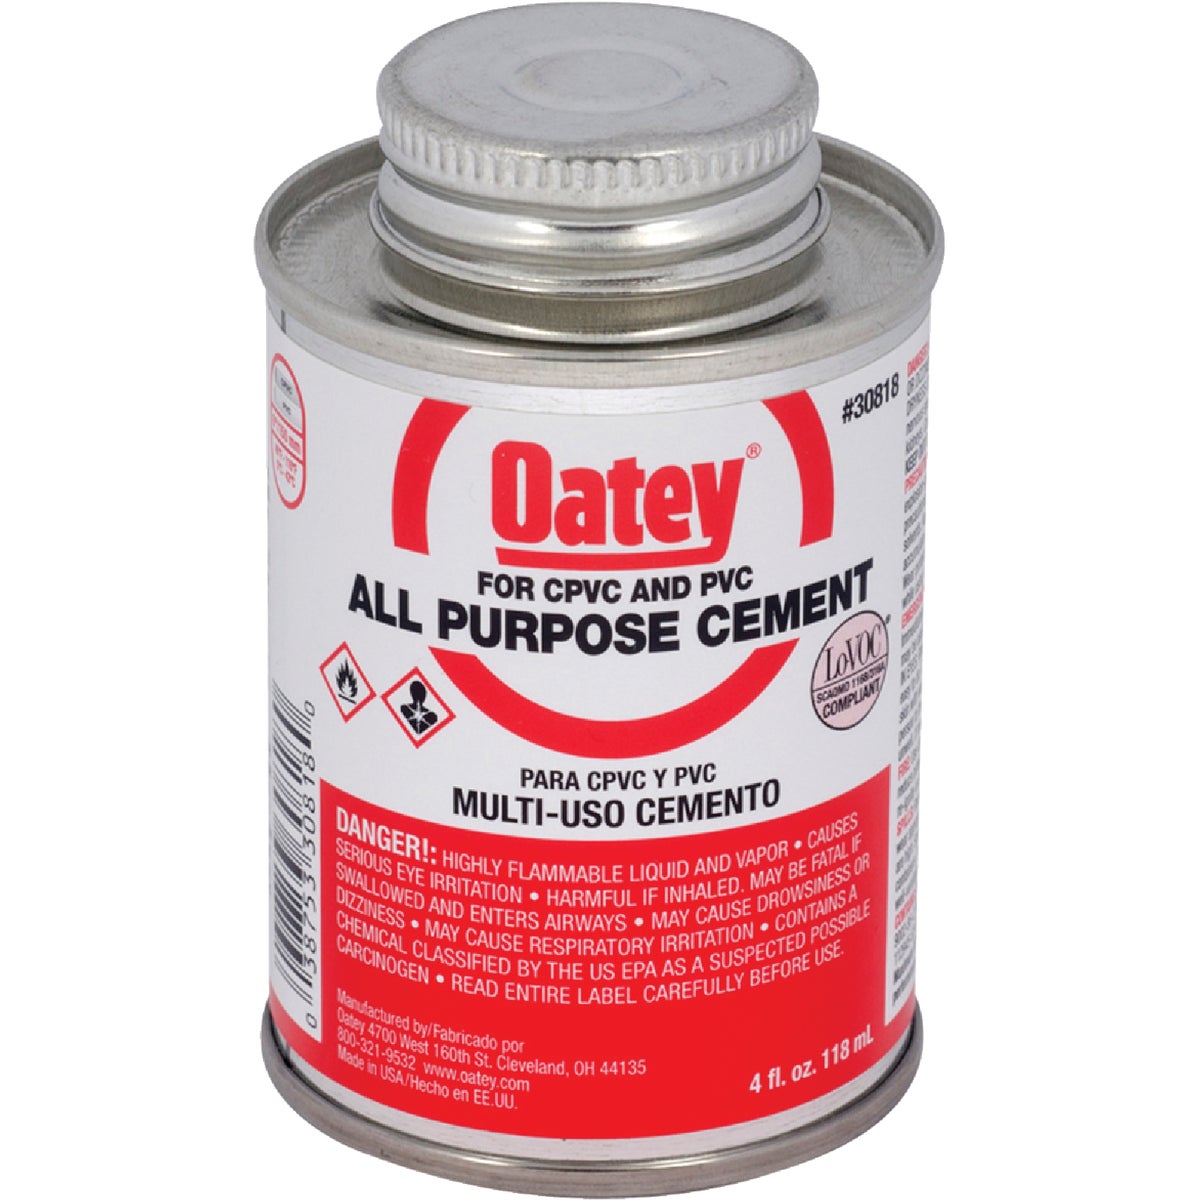 Oatey 4 Oz. Heavy Bodied Clear Multi-Purpose Cement for CPVC and PVC